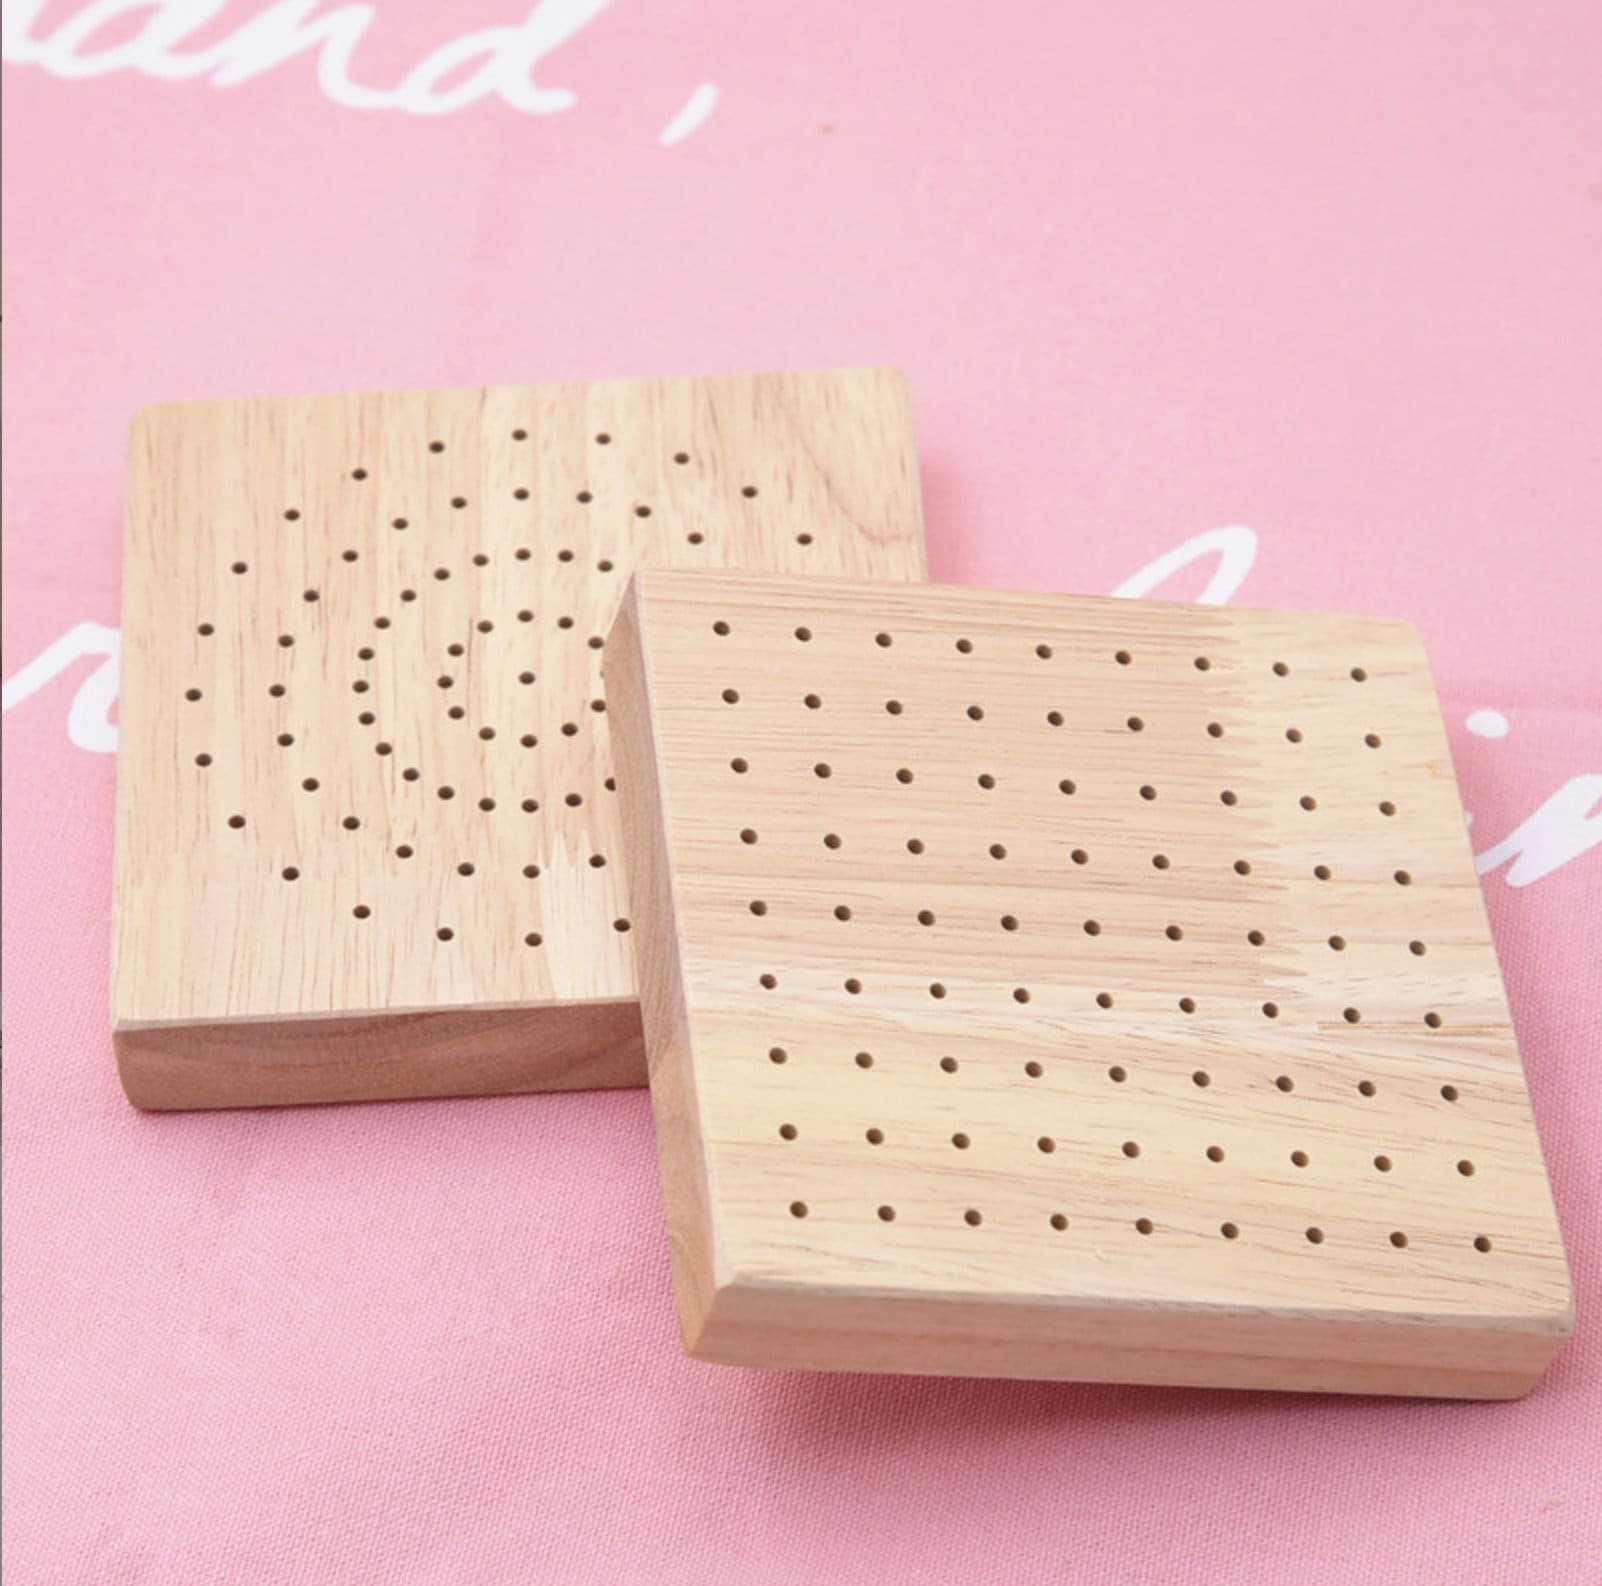 Wooden Base Plug Board for Model Making, Polymer Clay Making, DIY Supplies